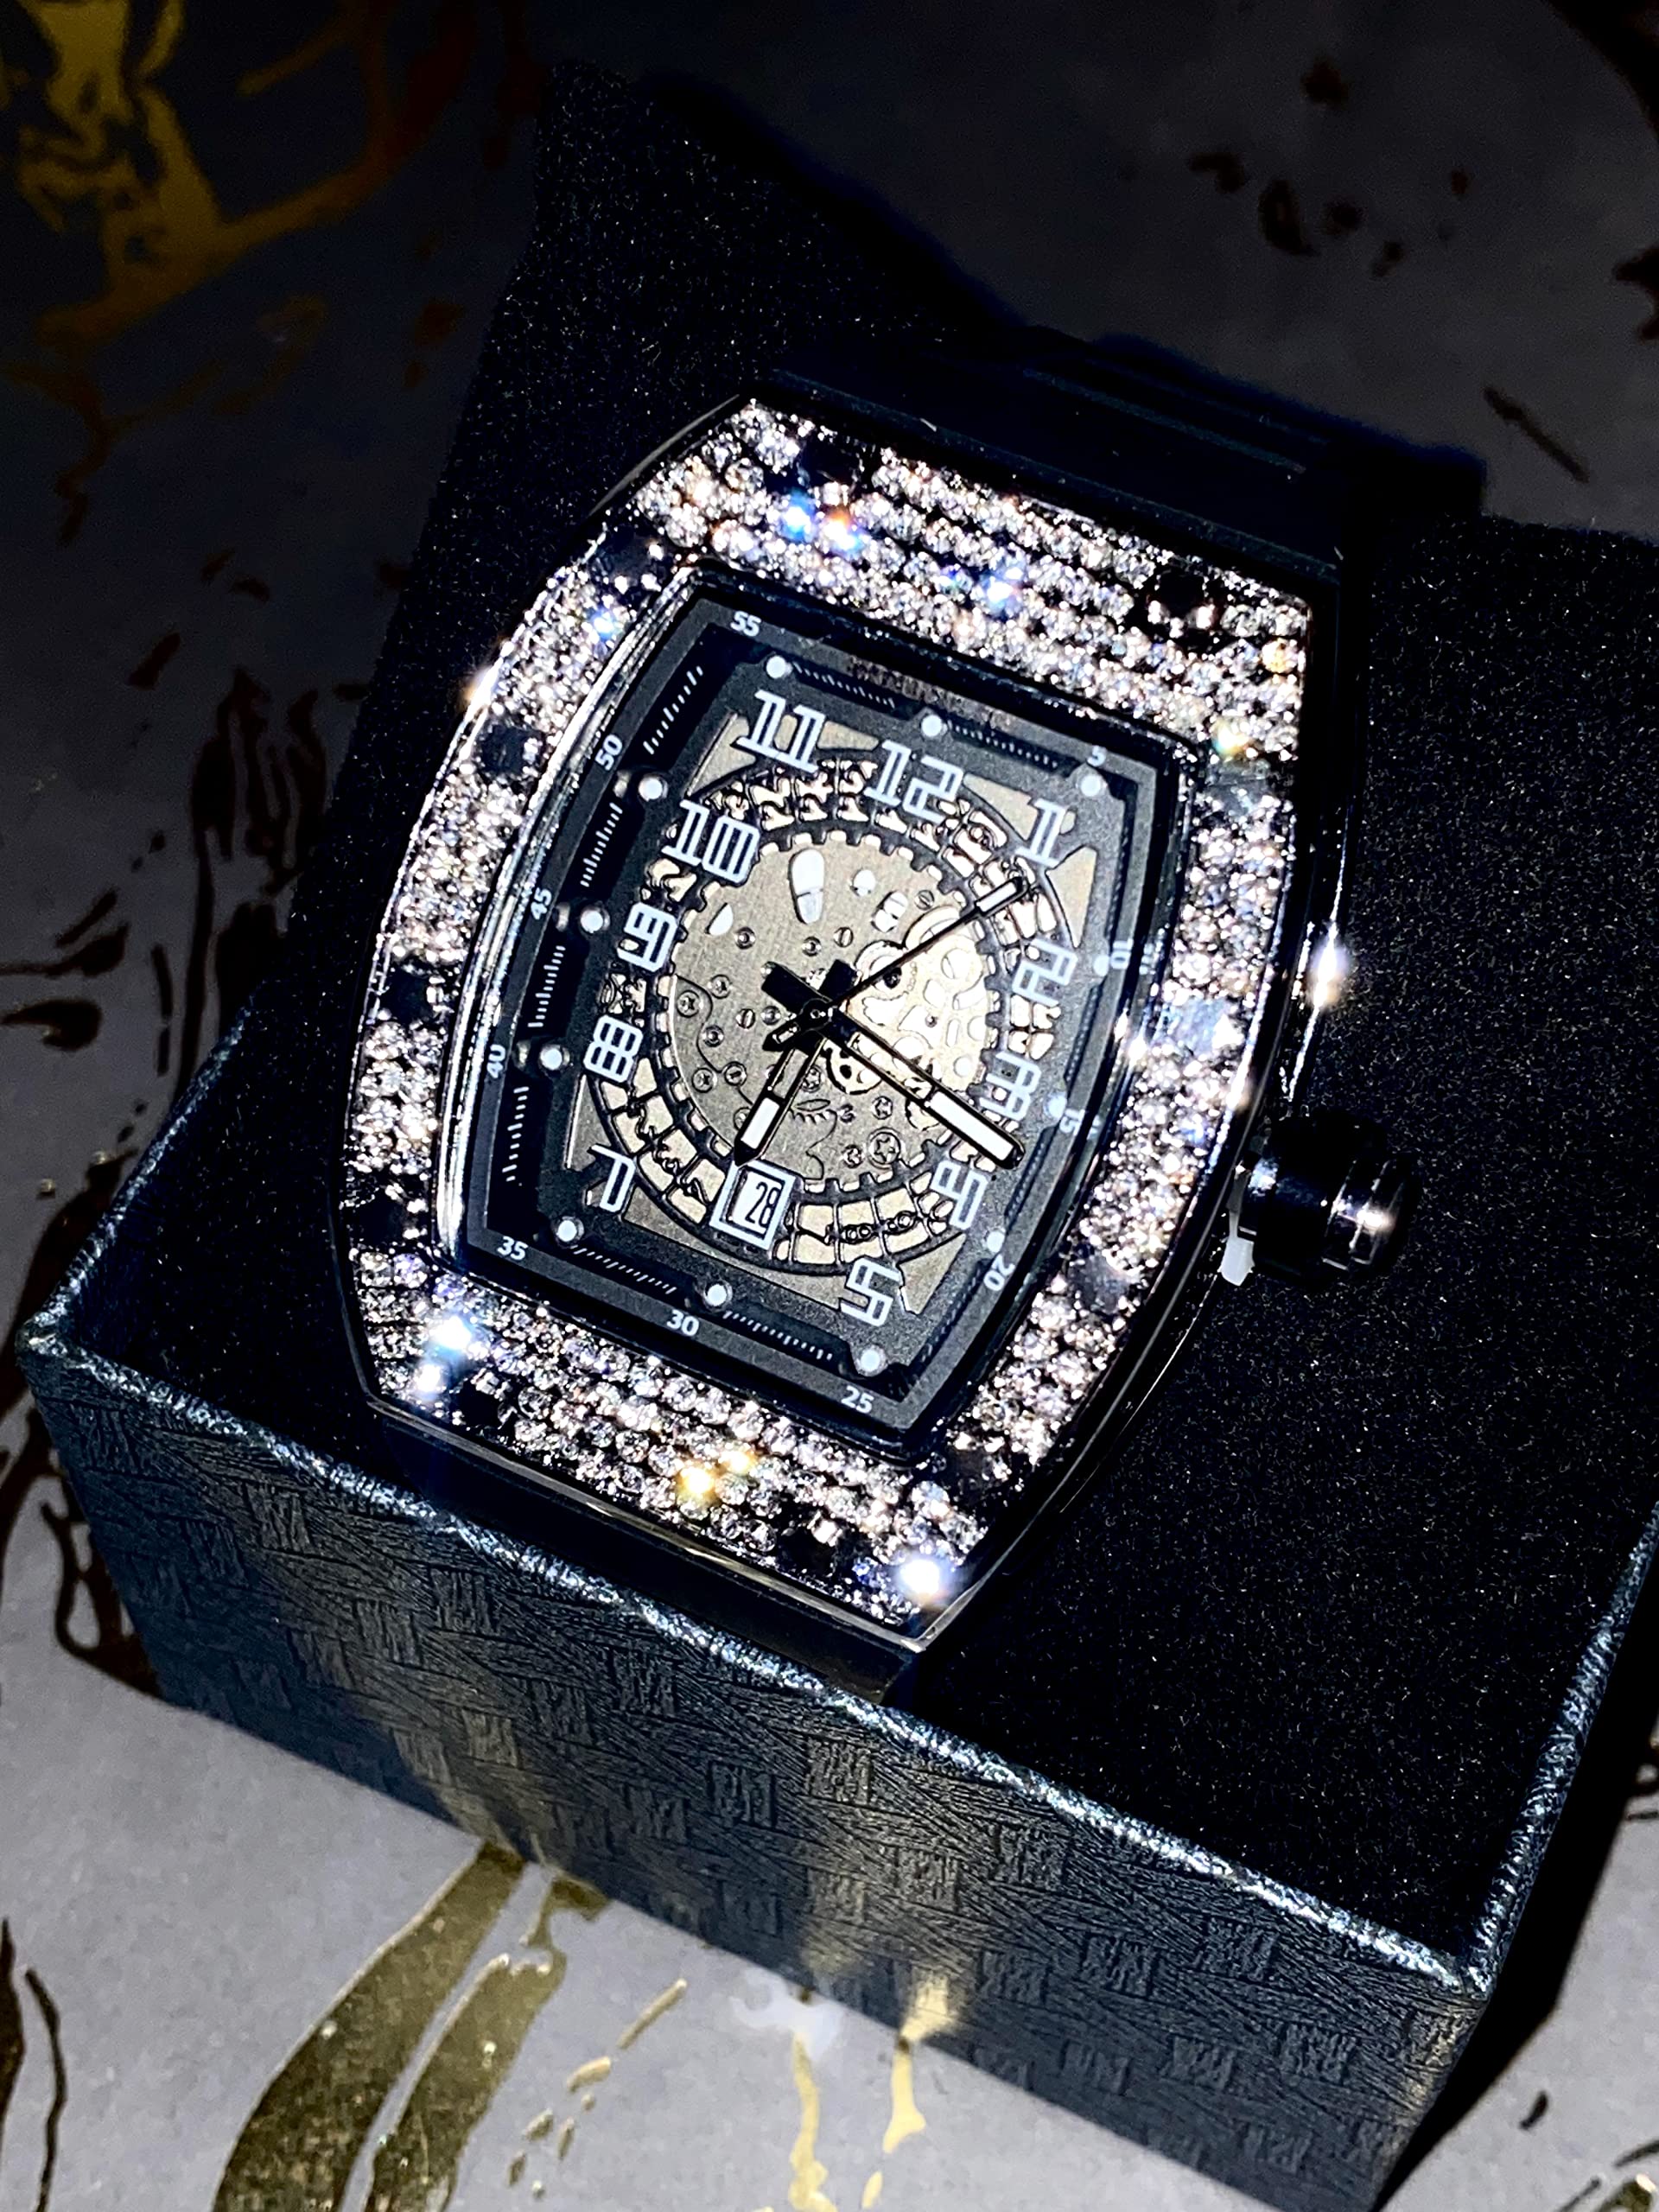 Men's Square Fashion Silver Numerical Rectangle Dial Wrist Watch Black Band Luxury CZ Diamond Iced Bracelet Watch Roman Numeric Dial Watch For Men Women Hip Hop Rapper Choice, Iced Out Bust Down Watch